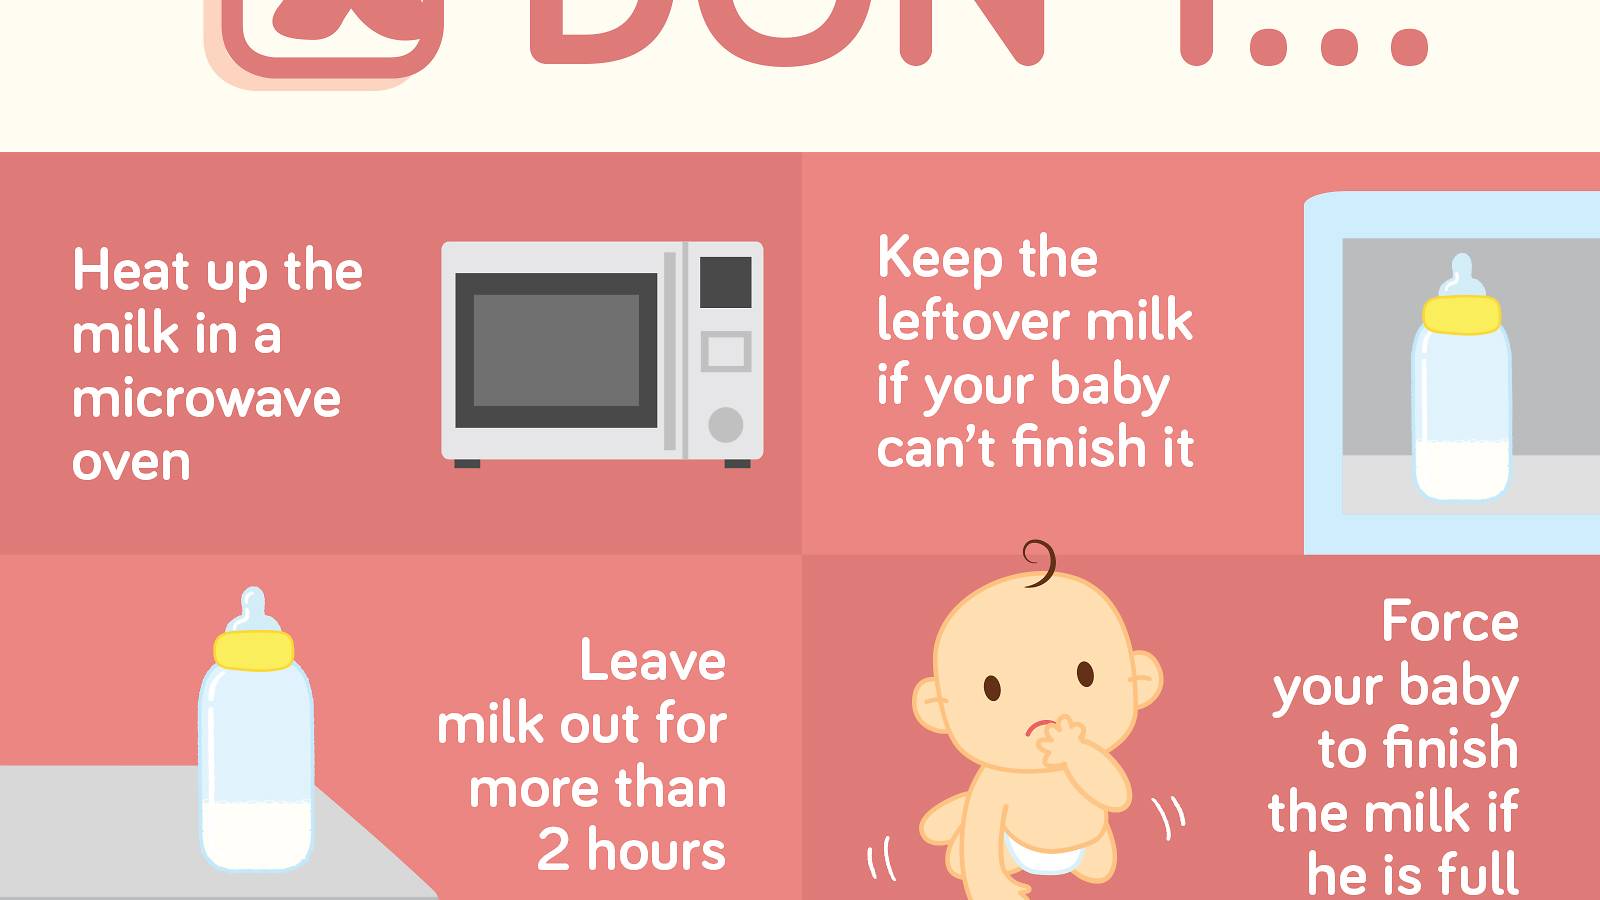 Babies-Do's-and-dont's-of-bottlefeeding-your-baby-safely-[Infographic]_05